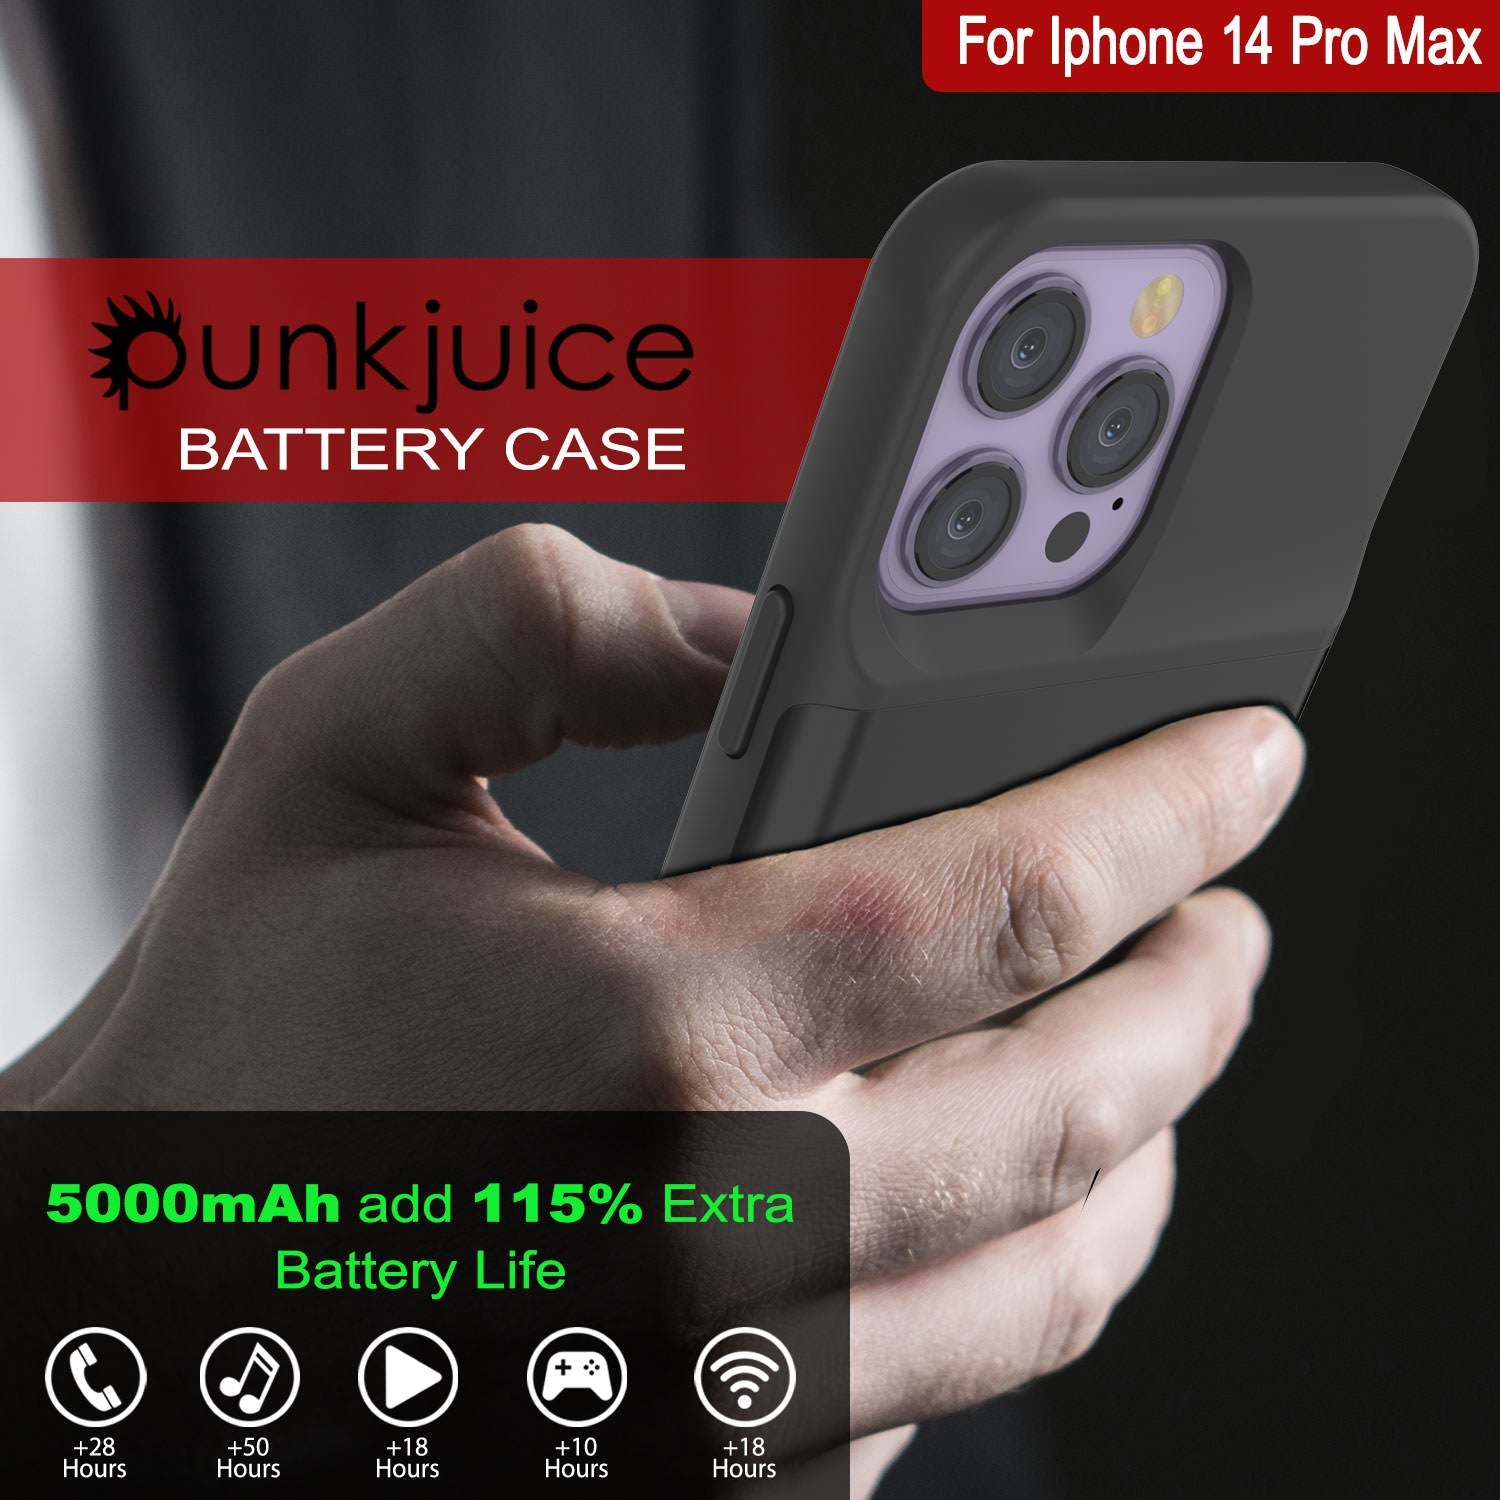 iPhone 14 Pro Max Battery Case, PunkJuice 4800mAH Fast Charging Power Bank W/ Screen Protector | [Black]